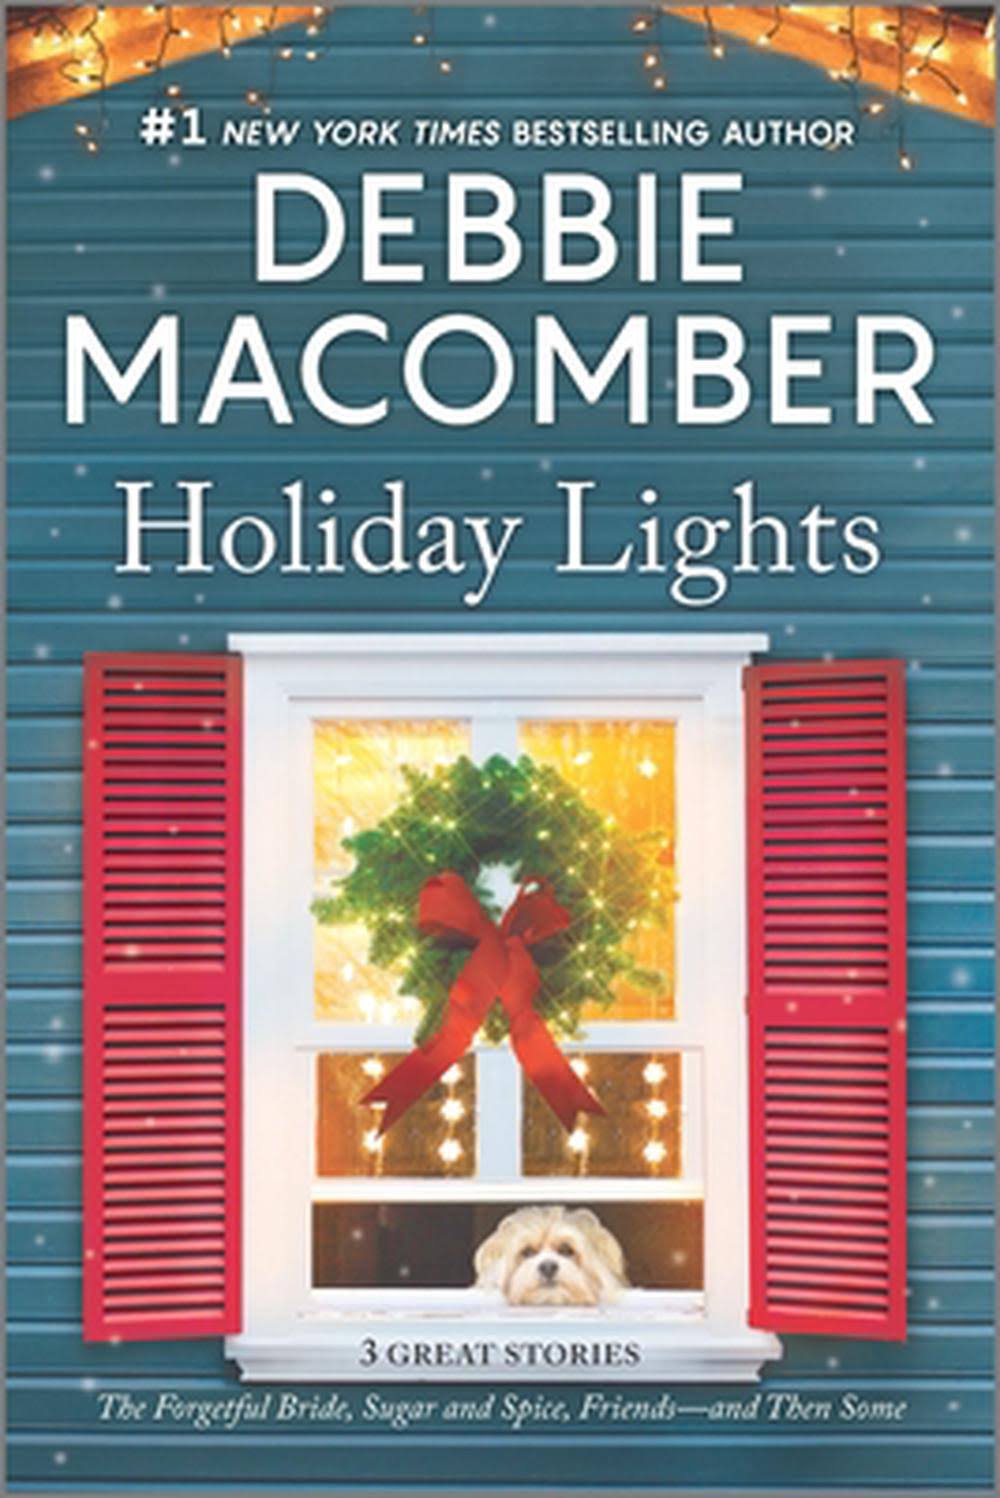 Holiday Lights by Debbie Macomber